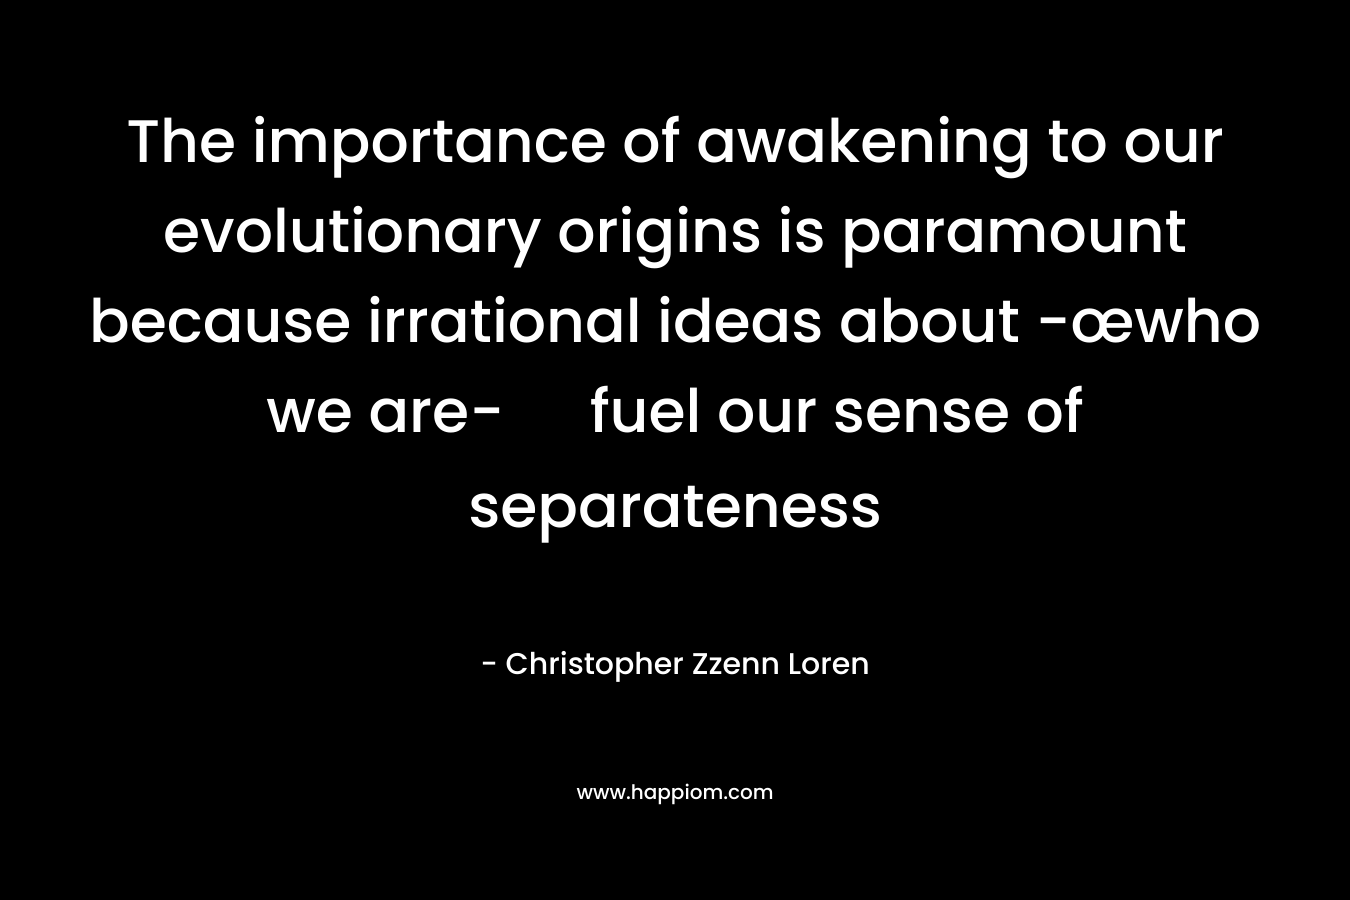 The importance of awakening to our evolutionary origins is paramount because irrational ideas about -œwho we are- fuel our sense of separateness – Christopher Zzenn Loren